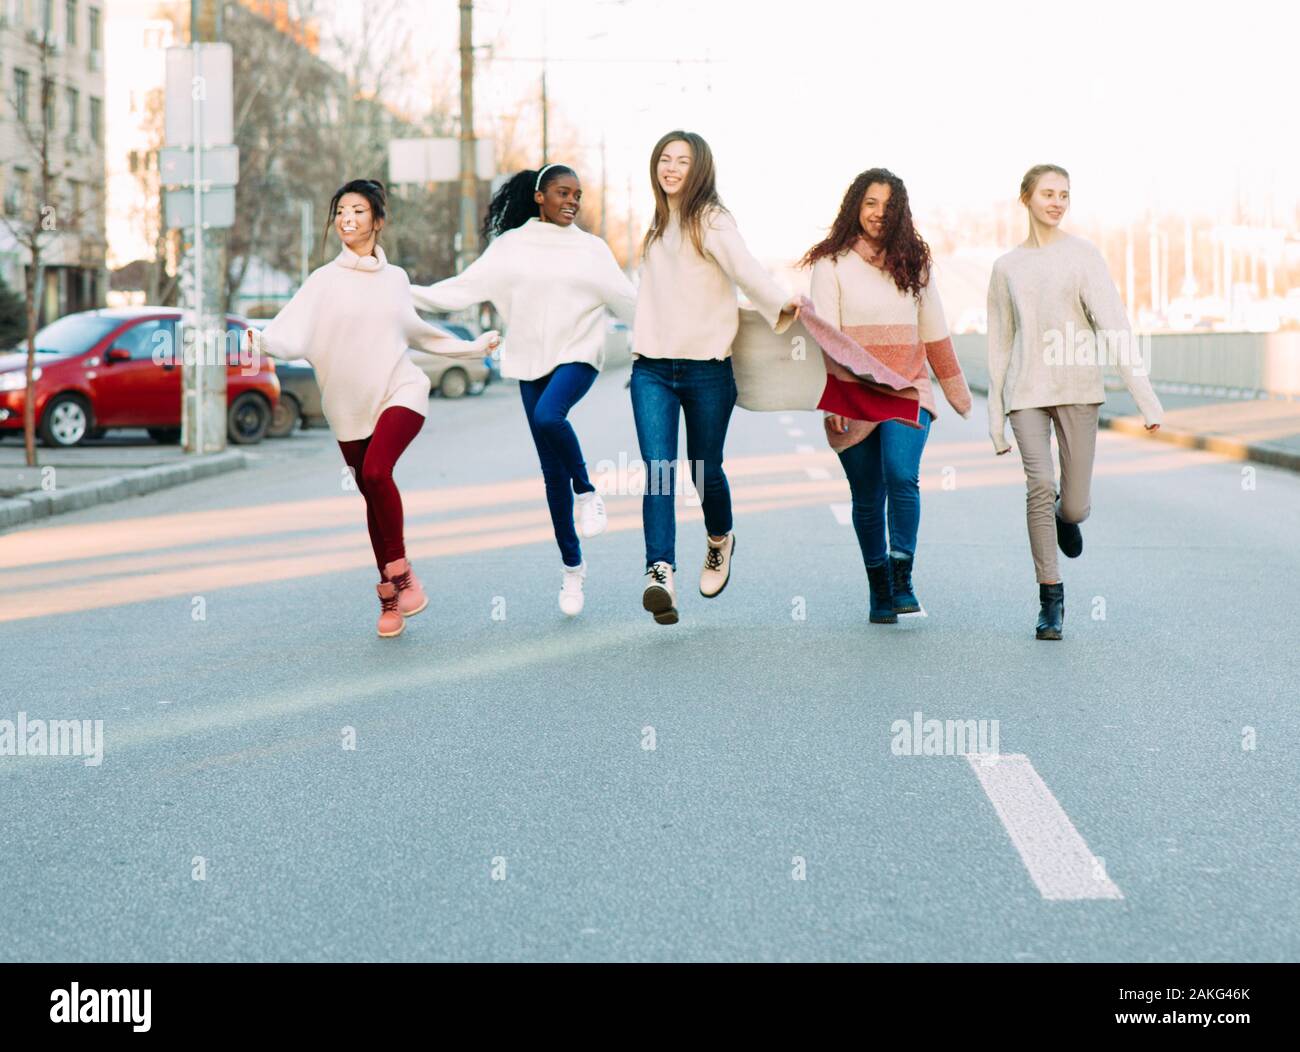 Multiracial group of friends from five young women runs and has a fun on city street. The concept of friendship and unity between different human race Stock Photo